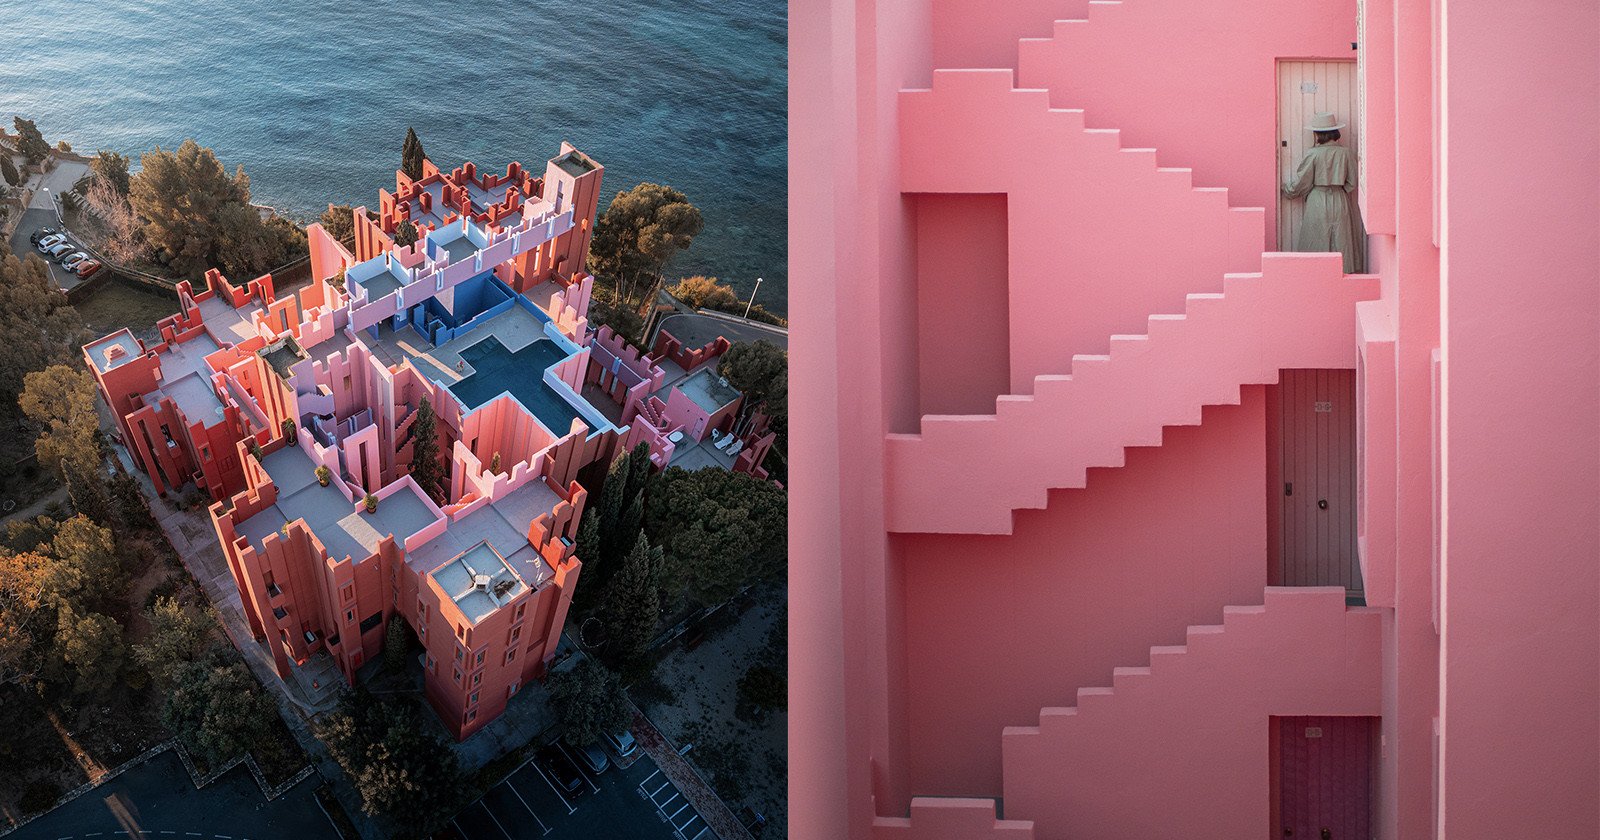 Mind-Bending Photos of the Building That Inspired the Squid Game Set